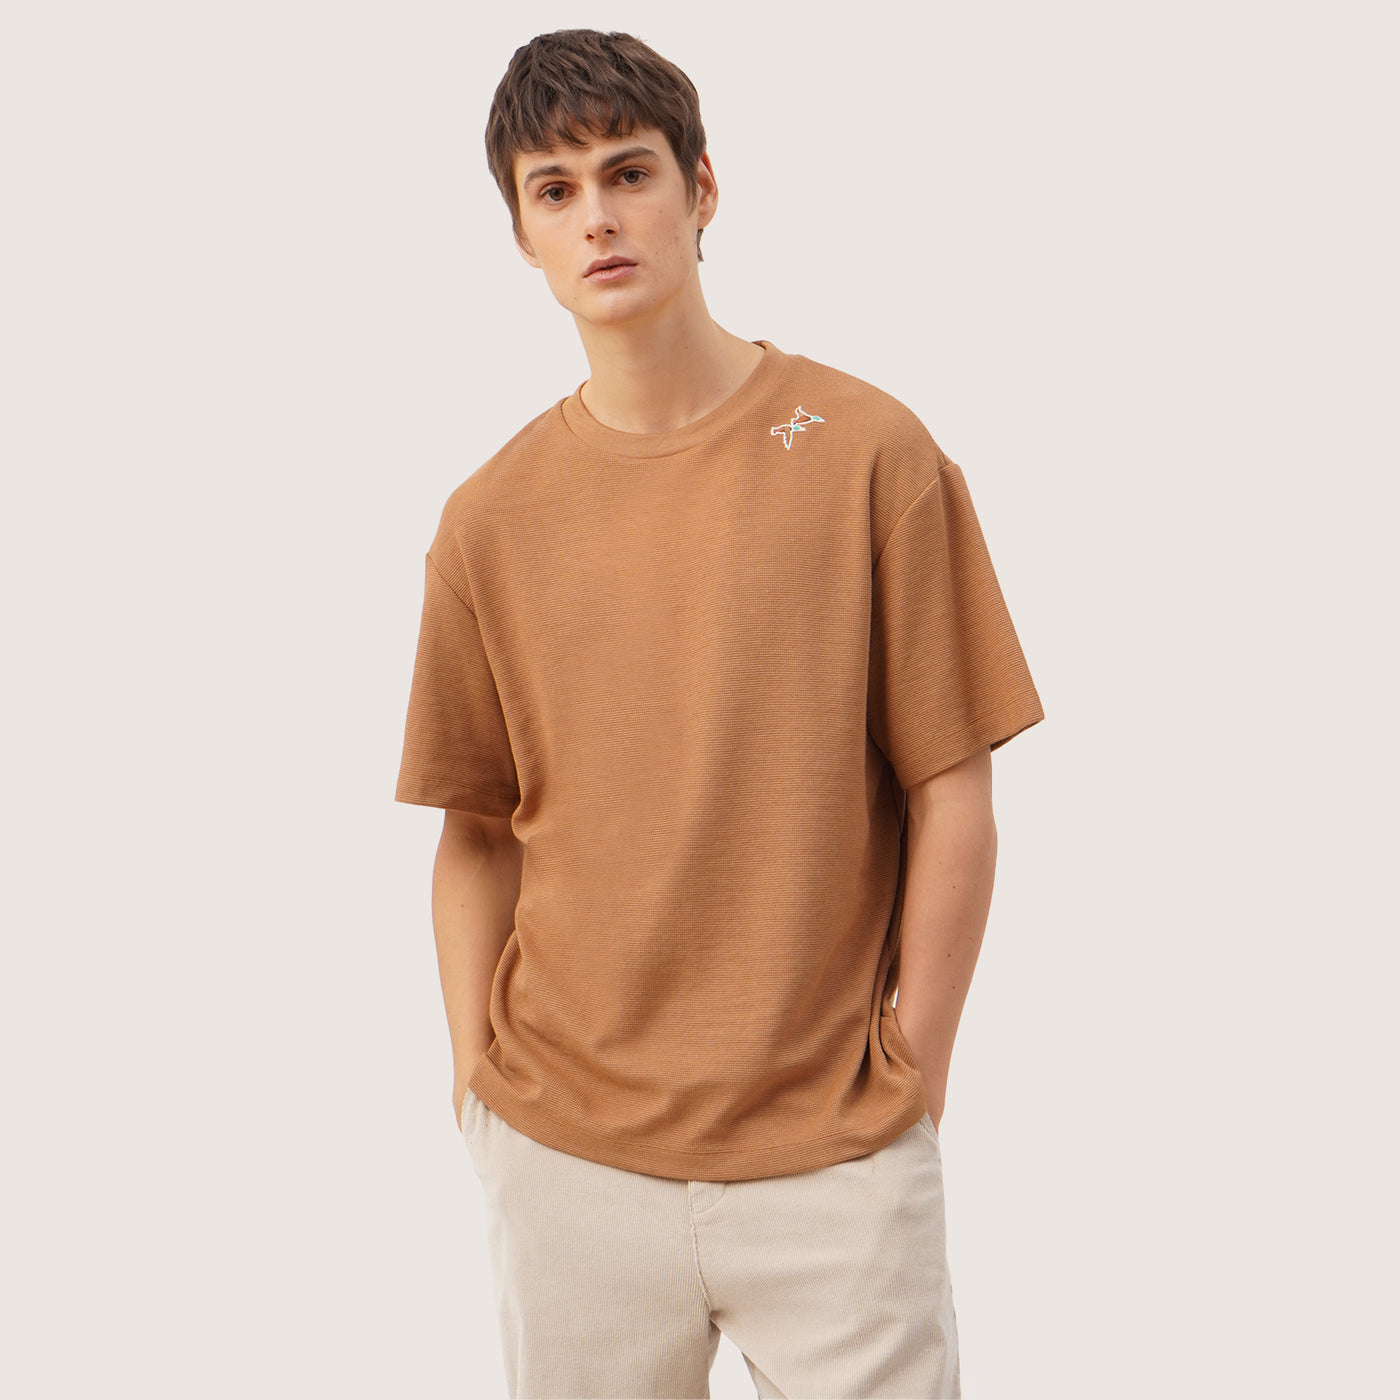 Men's Textured Knit Relaxed Fit T-Shirt with Shoulder Mallard Embroidery